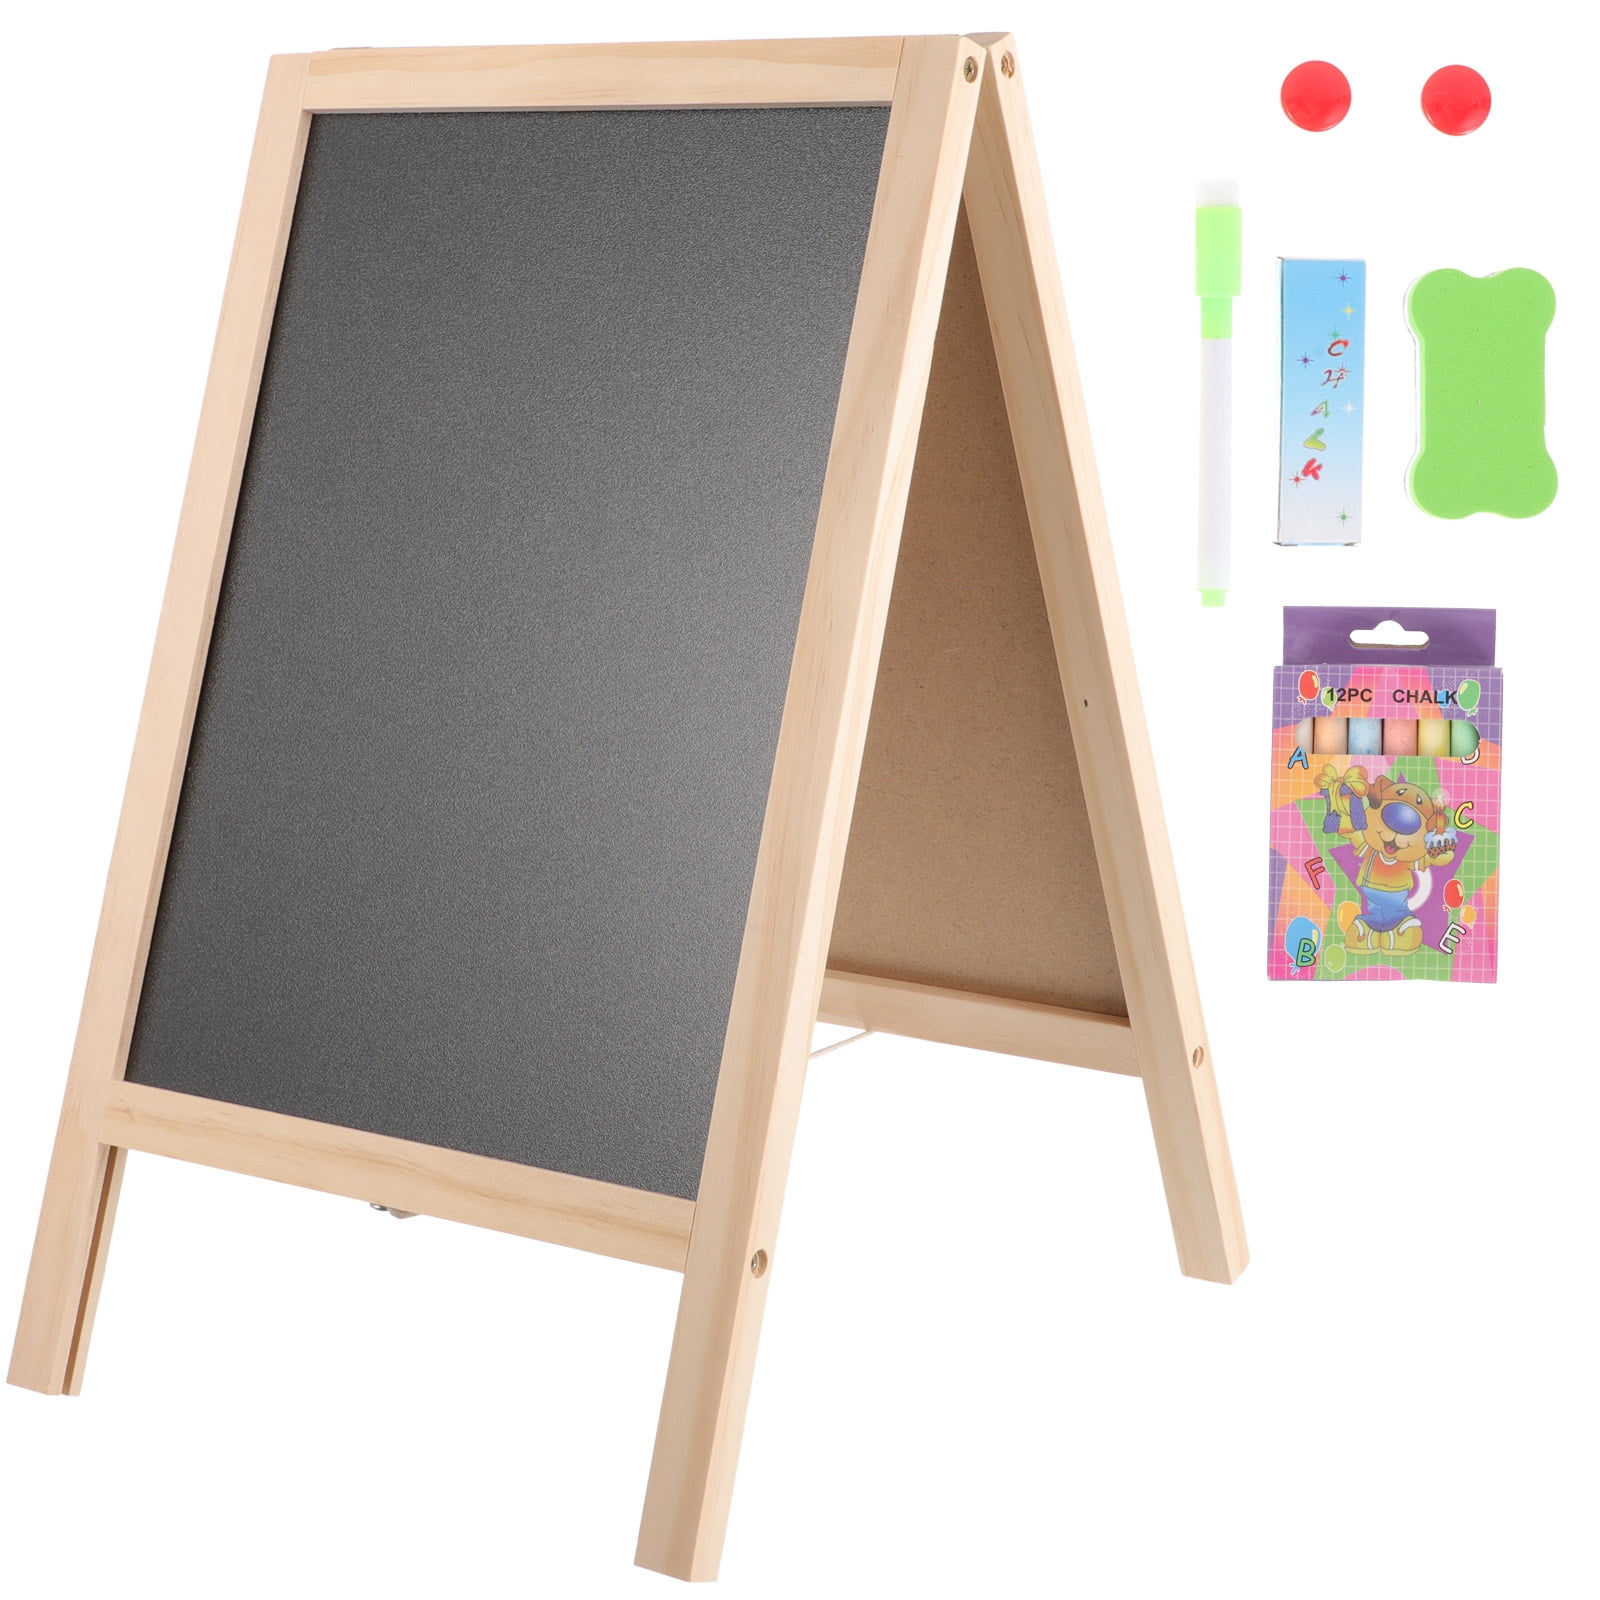 12 x 16 Handheld Dry Erase White Board for Wall Mini Double Sided Easel  Hold for Kids Drawing(2 Pack)